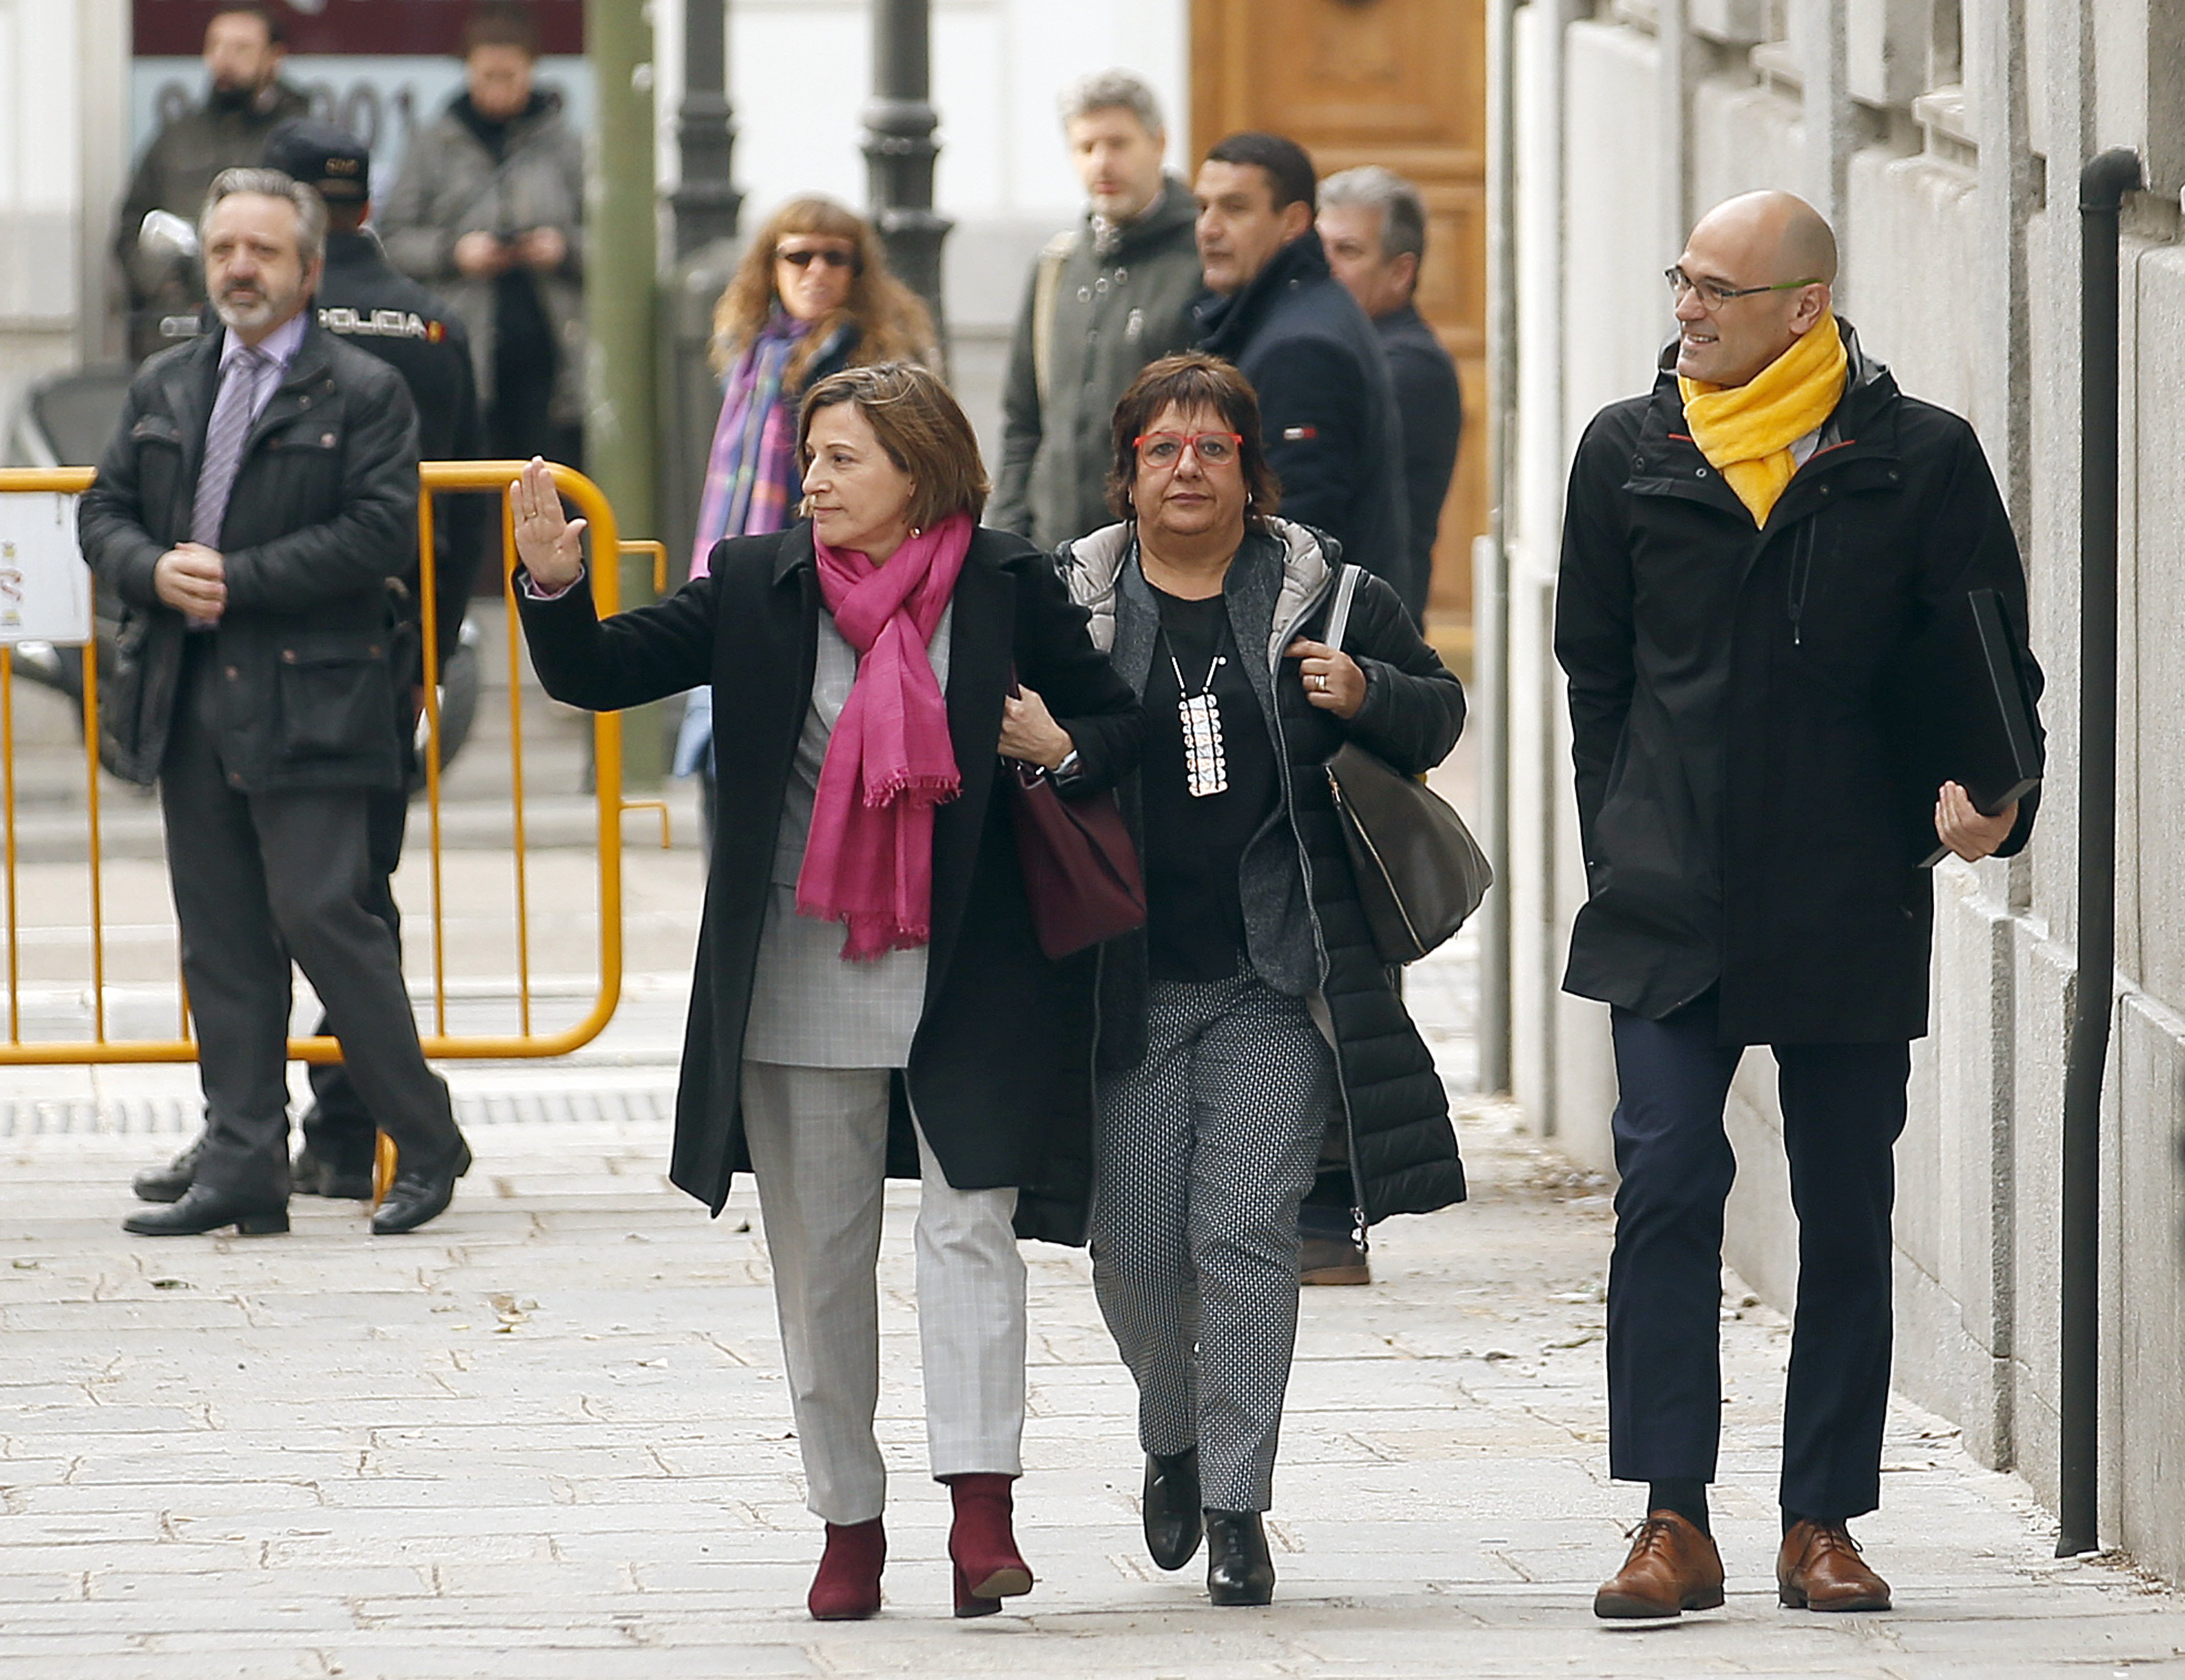 Judge orders Carme Forcadell and Dolors Bassa back to lock-up jail regime